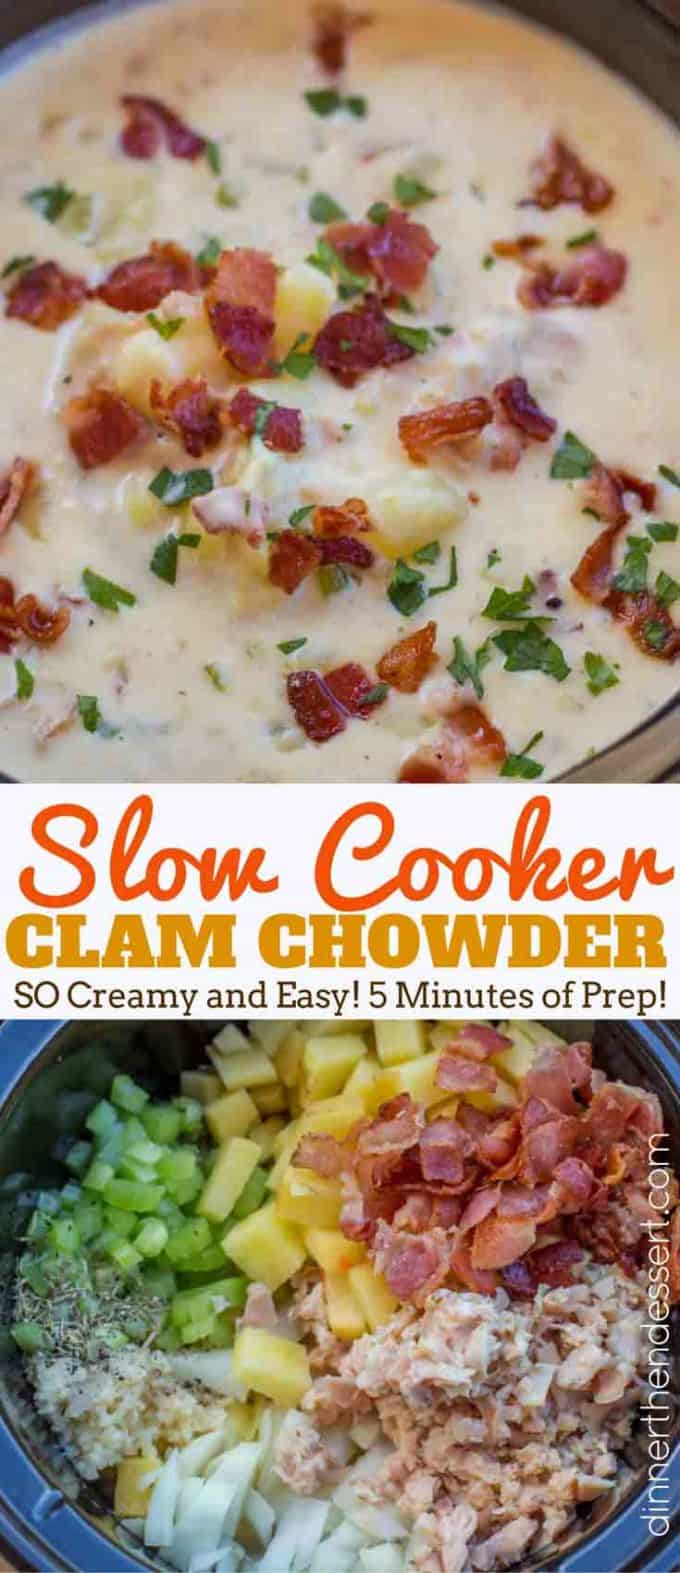 Slow Cooker Clam Chowder is so easy to make with a deliciously creamy, briny flavor mixed with smoky crispy bits of bacon and rich buttery yukon potatoes. #clamchowder #slowcooker #crockpot #bacon #clams #chowder